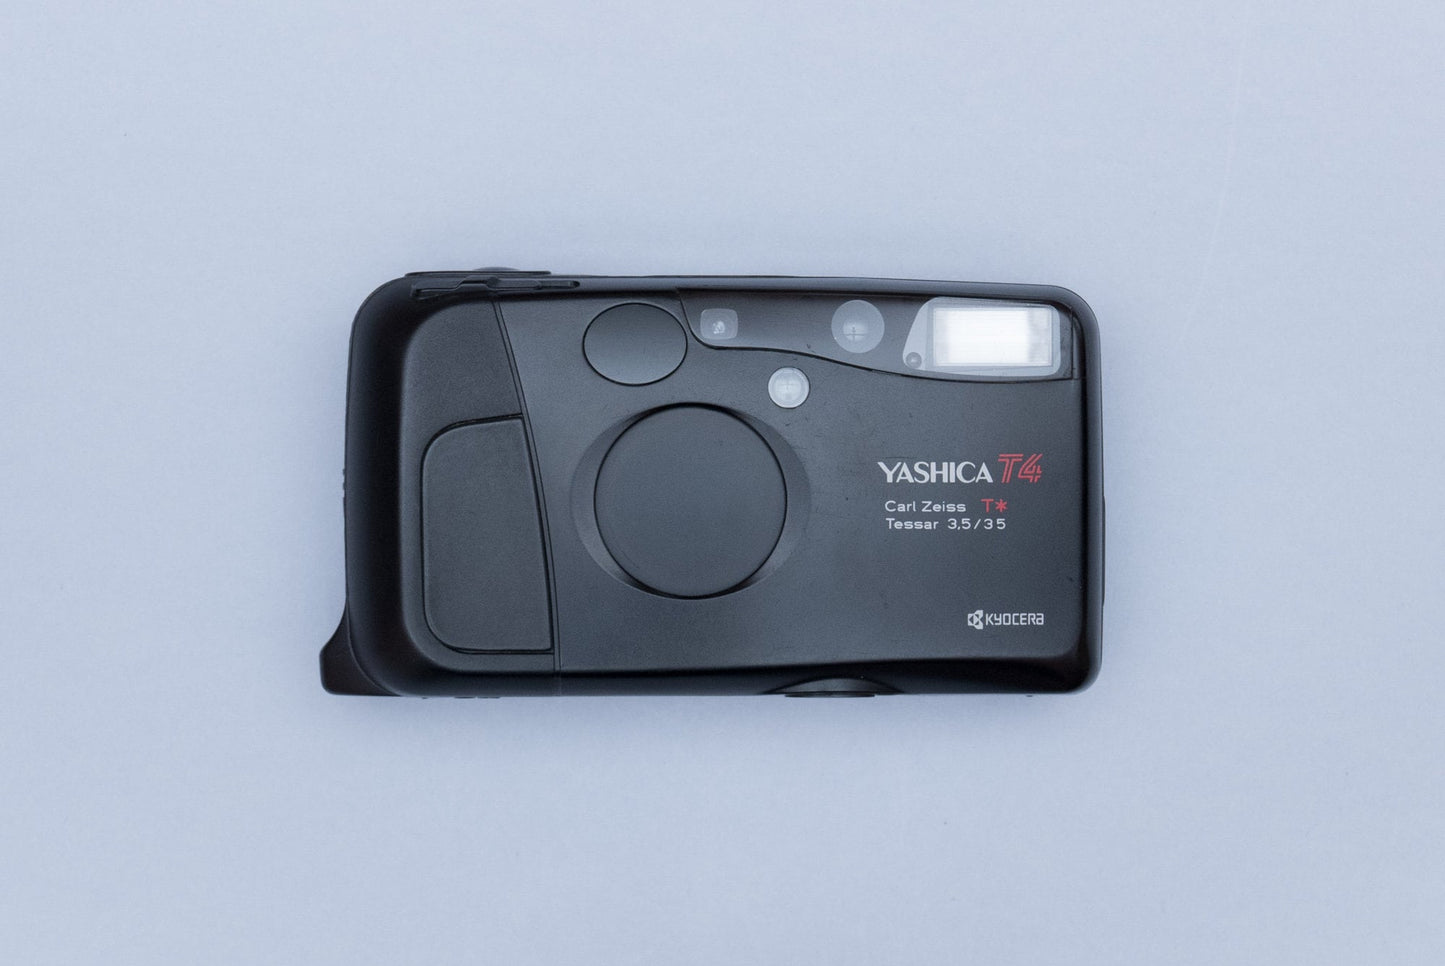 Yashica T4 Carl Zeiss Tessar 35mm Compact Film Camera Kyocera Point and Shoot